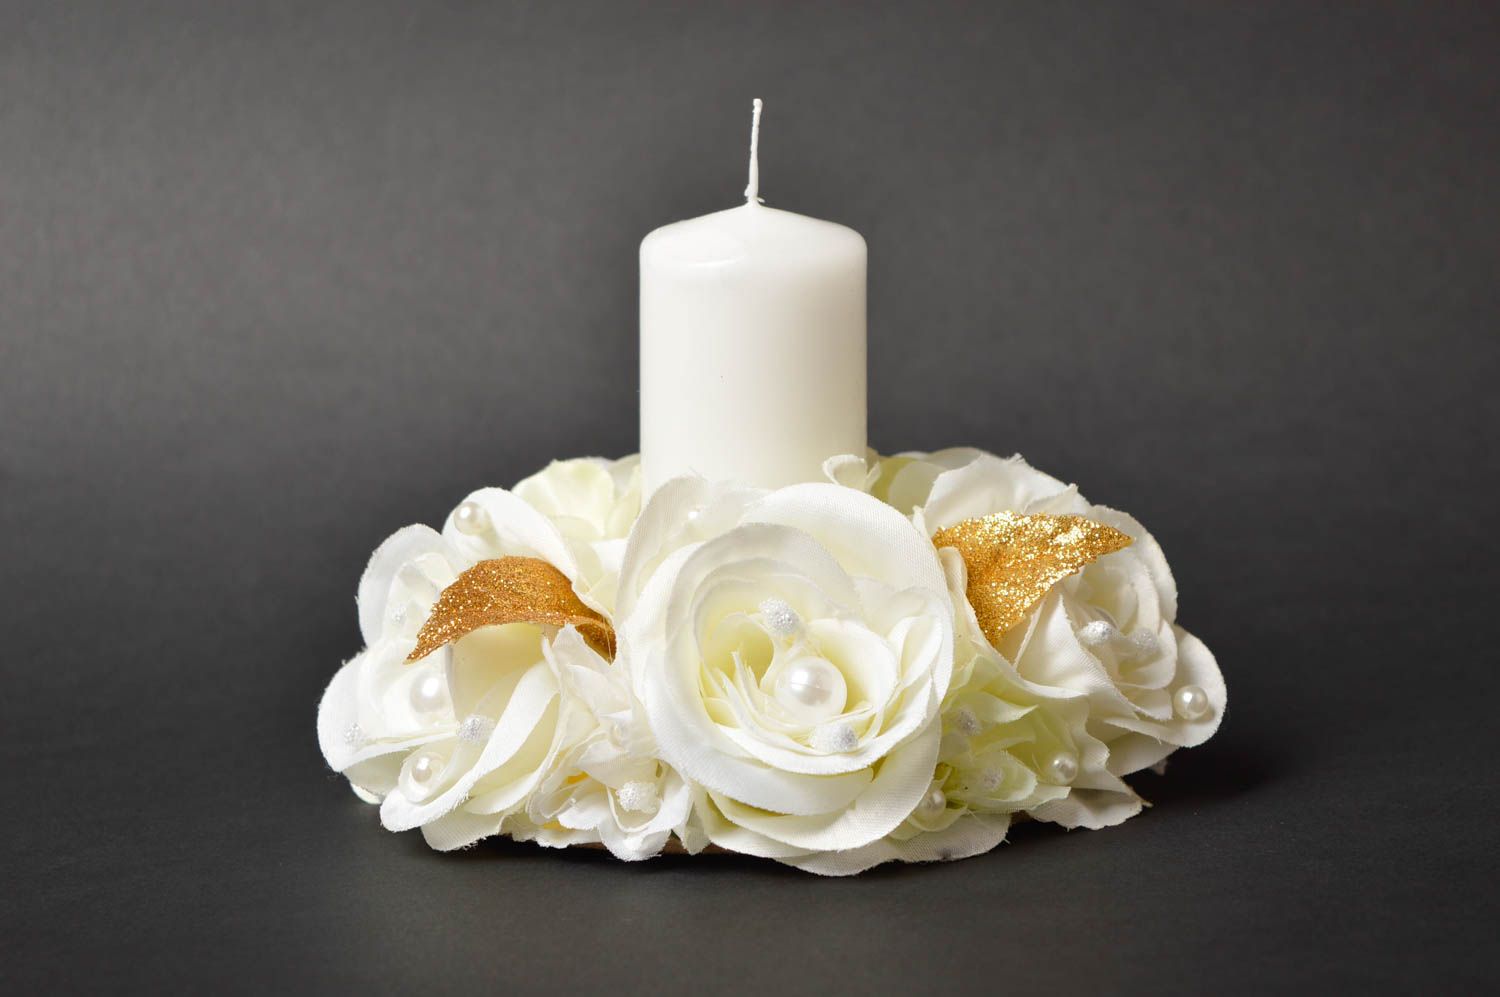 Handmade wedding candle unity candle best candles wedding accessories photo 2